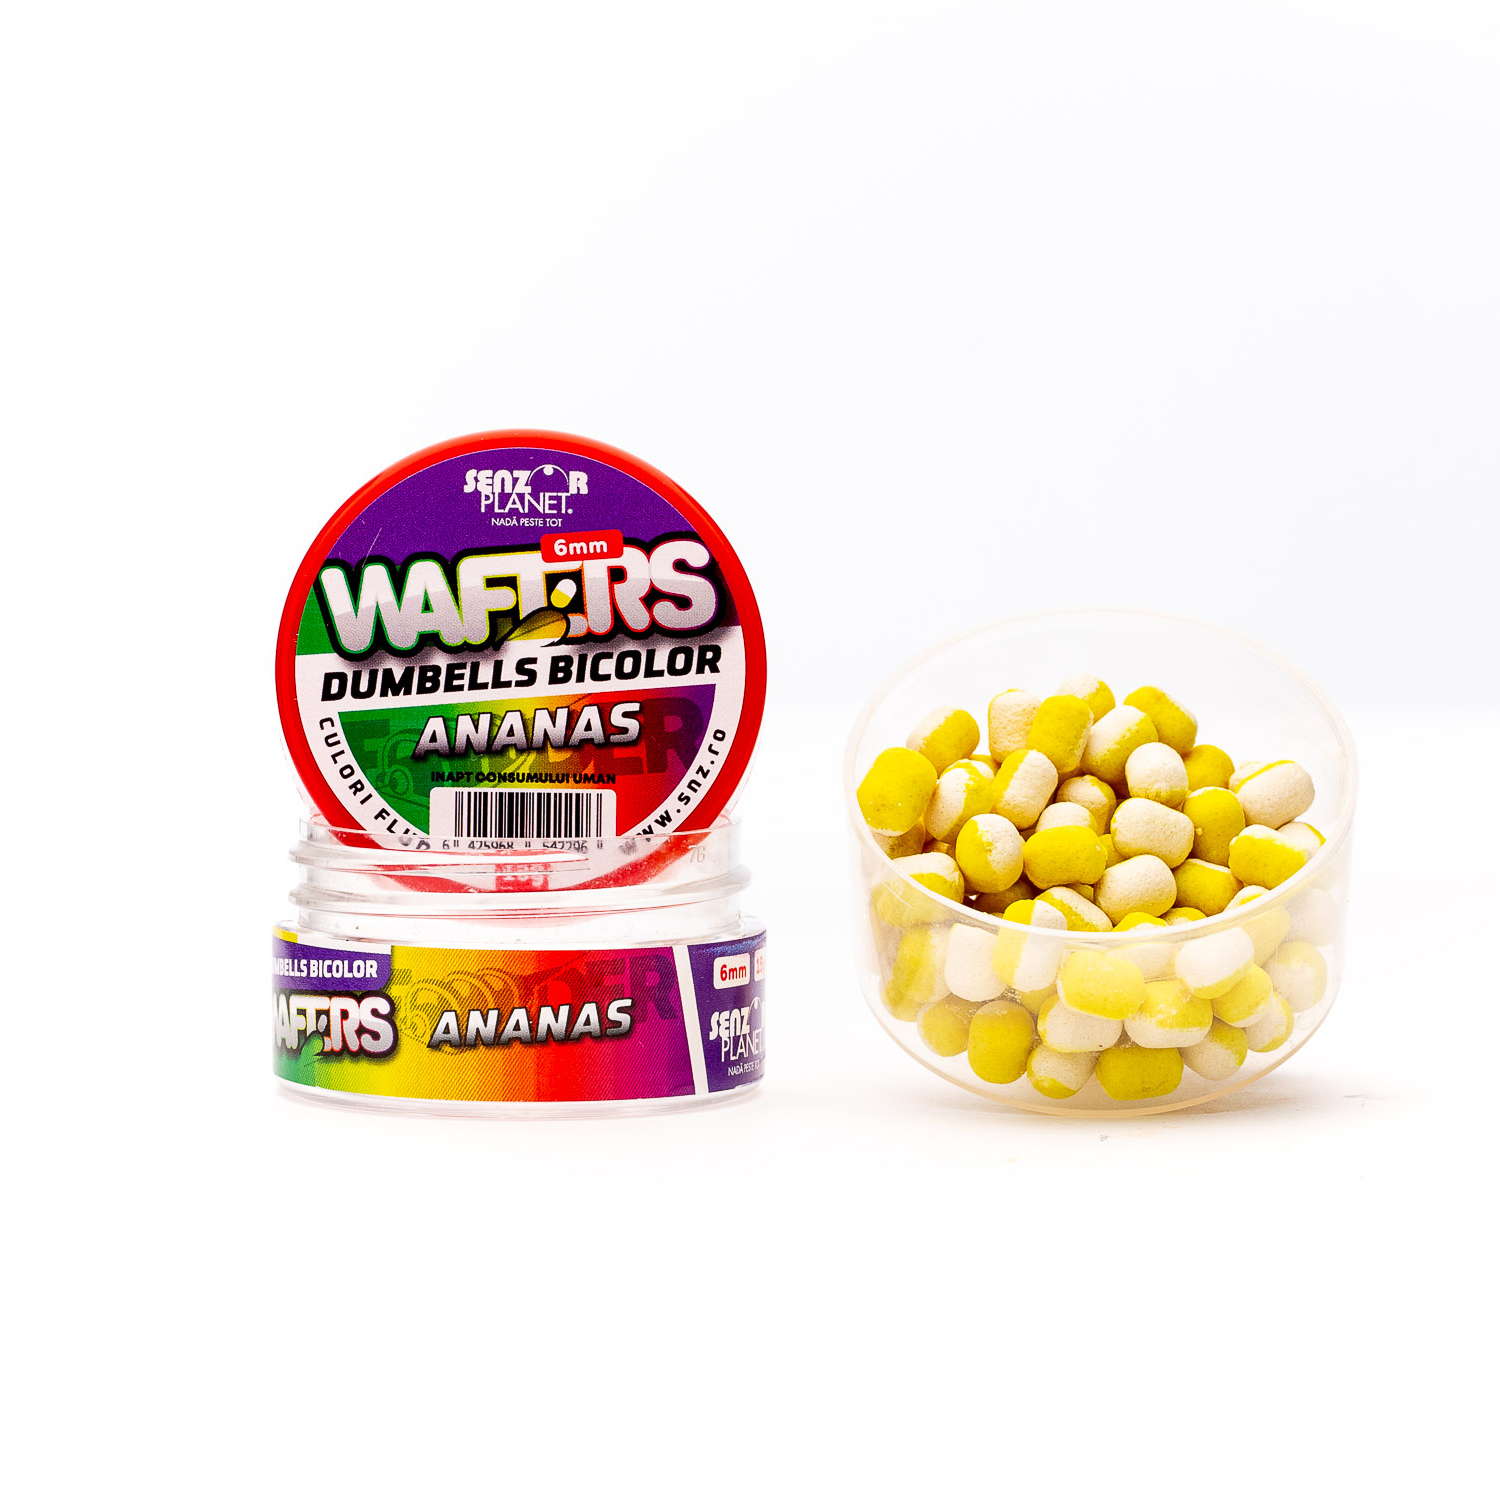 WAFTERS DUMBELLS BICOLOR ANANAS 6mm 15g